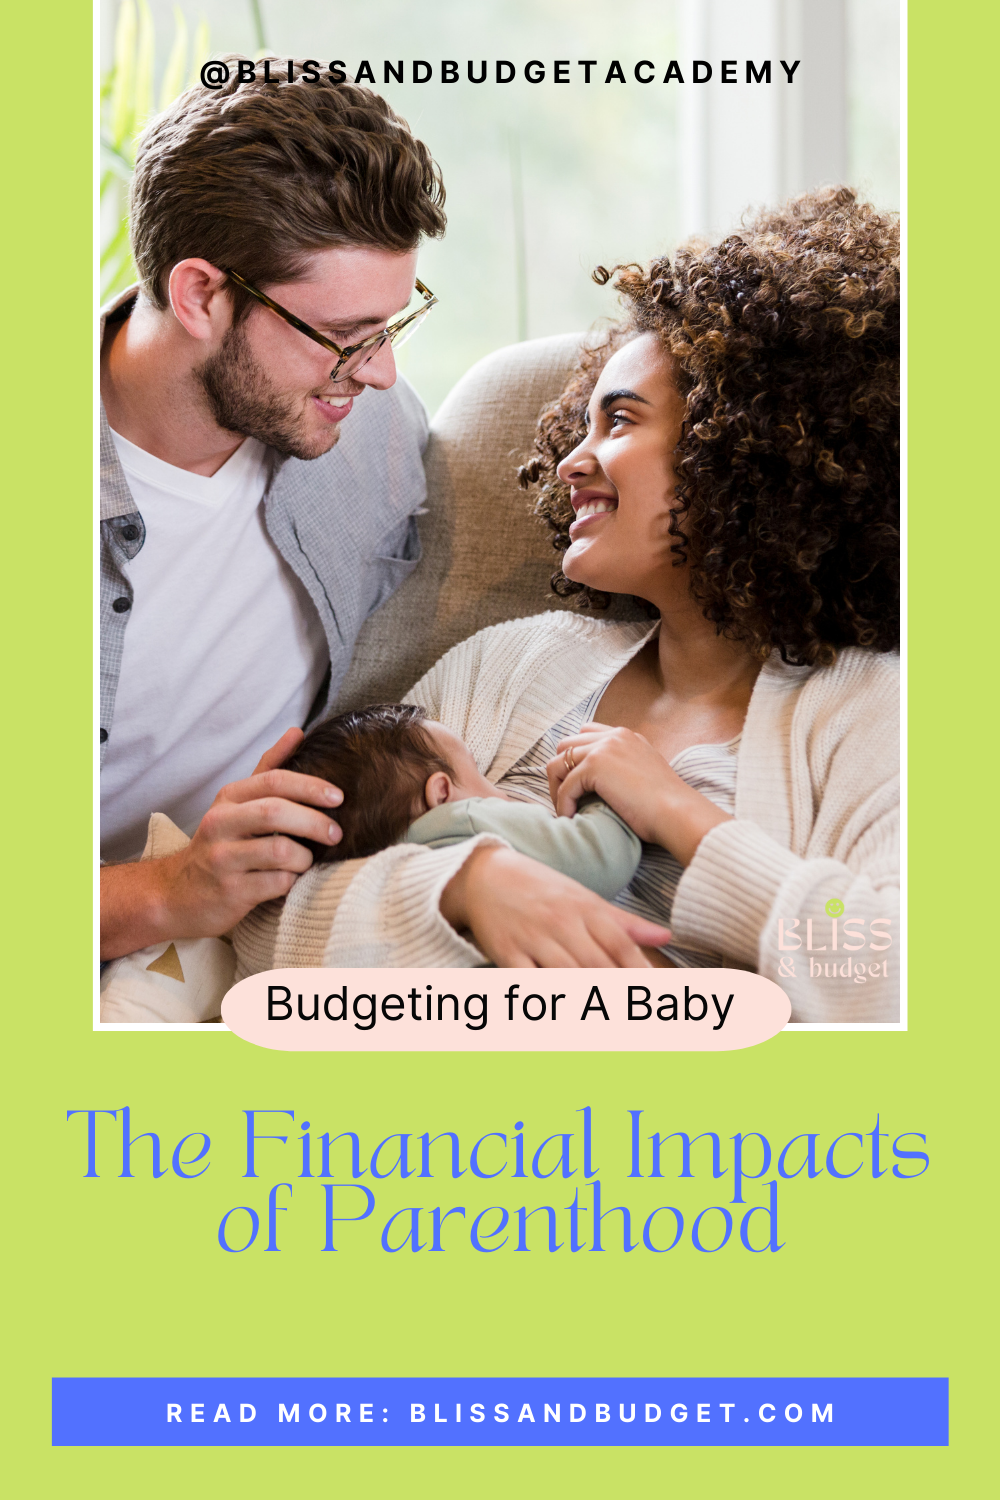 Budgeting for A Baby: The Financial Impacts of Parenthood